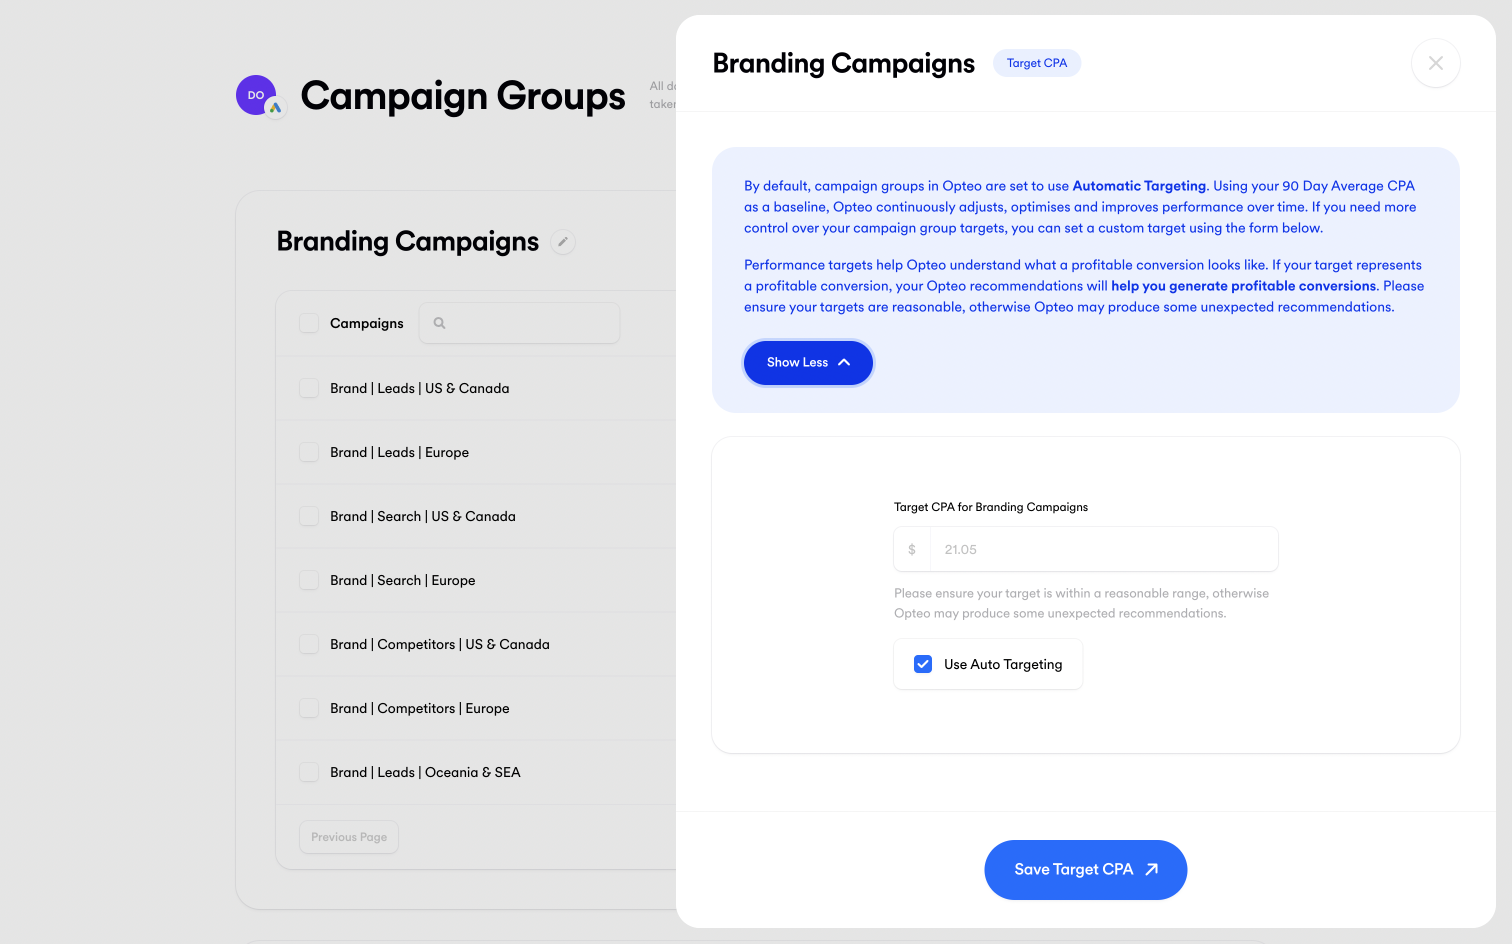 Screenshot of "Target CPA" panel in Campaign Groups